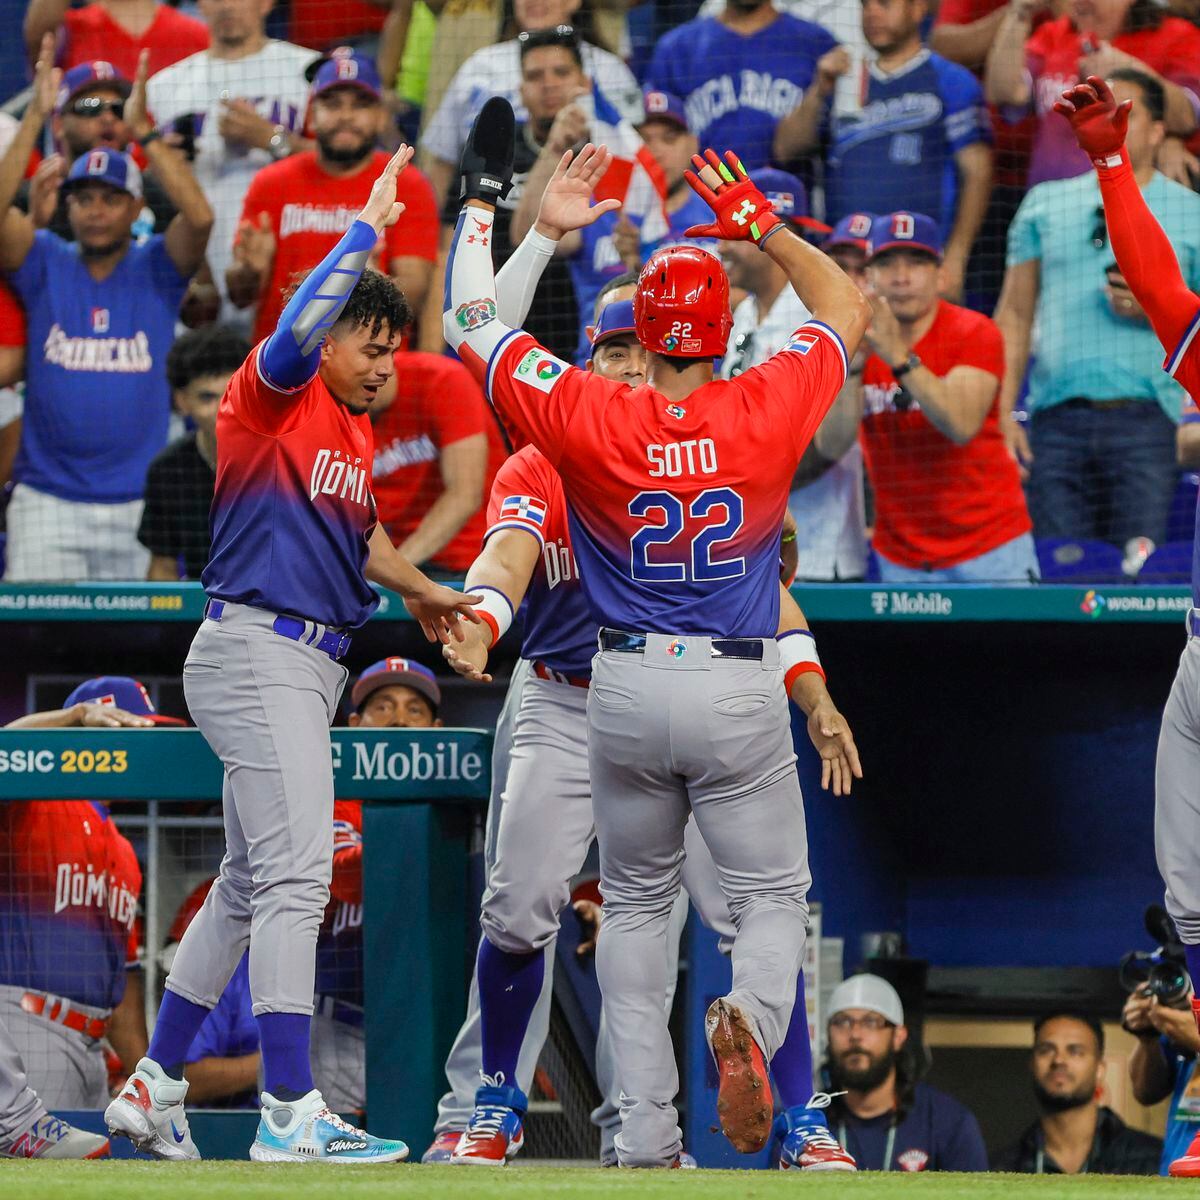 Baseball-Dominican Republic rallies past Israel to advance to medal game